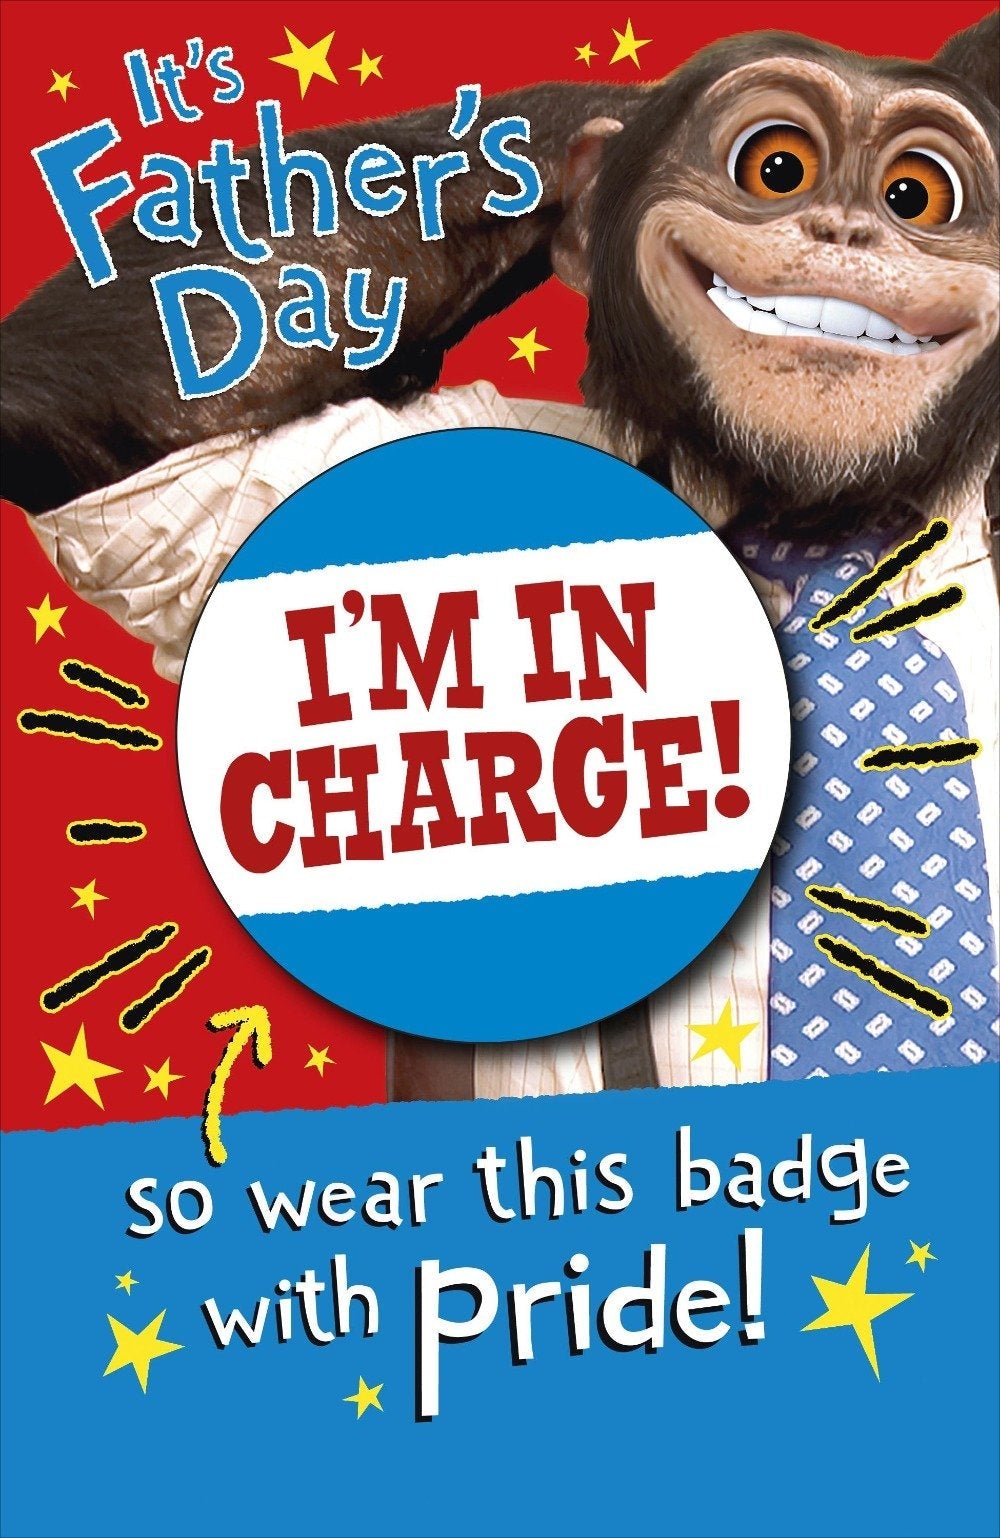 Fathers Day Card - Humour / Smiling Monkey (Badge Includes)